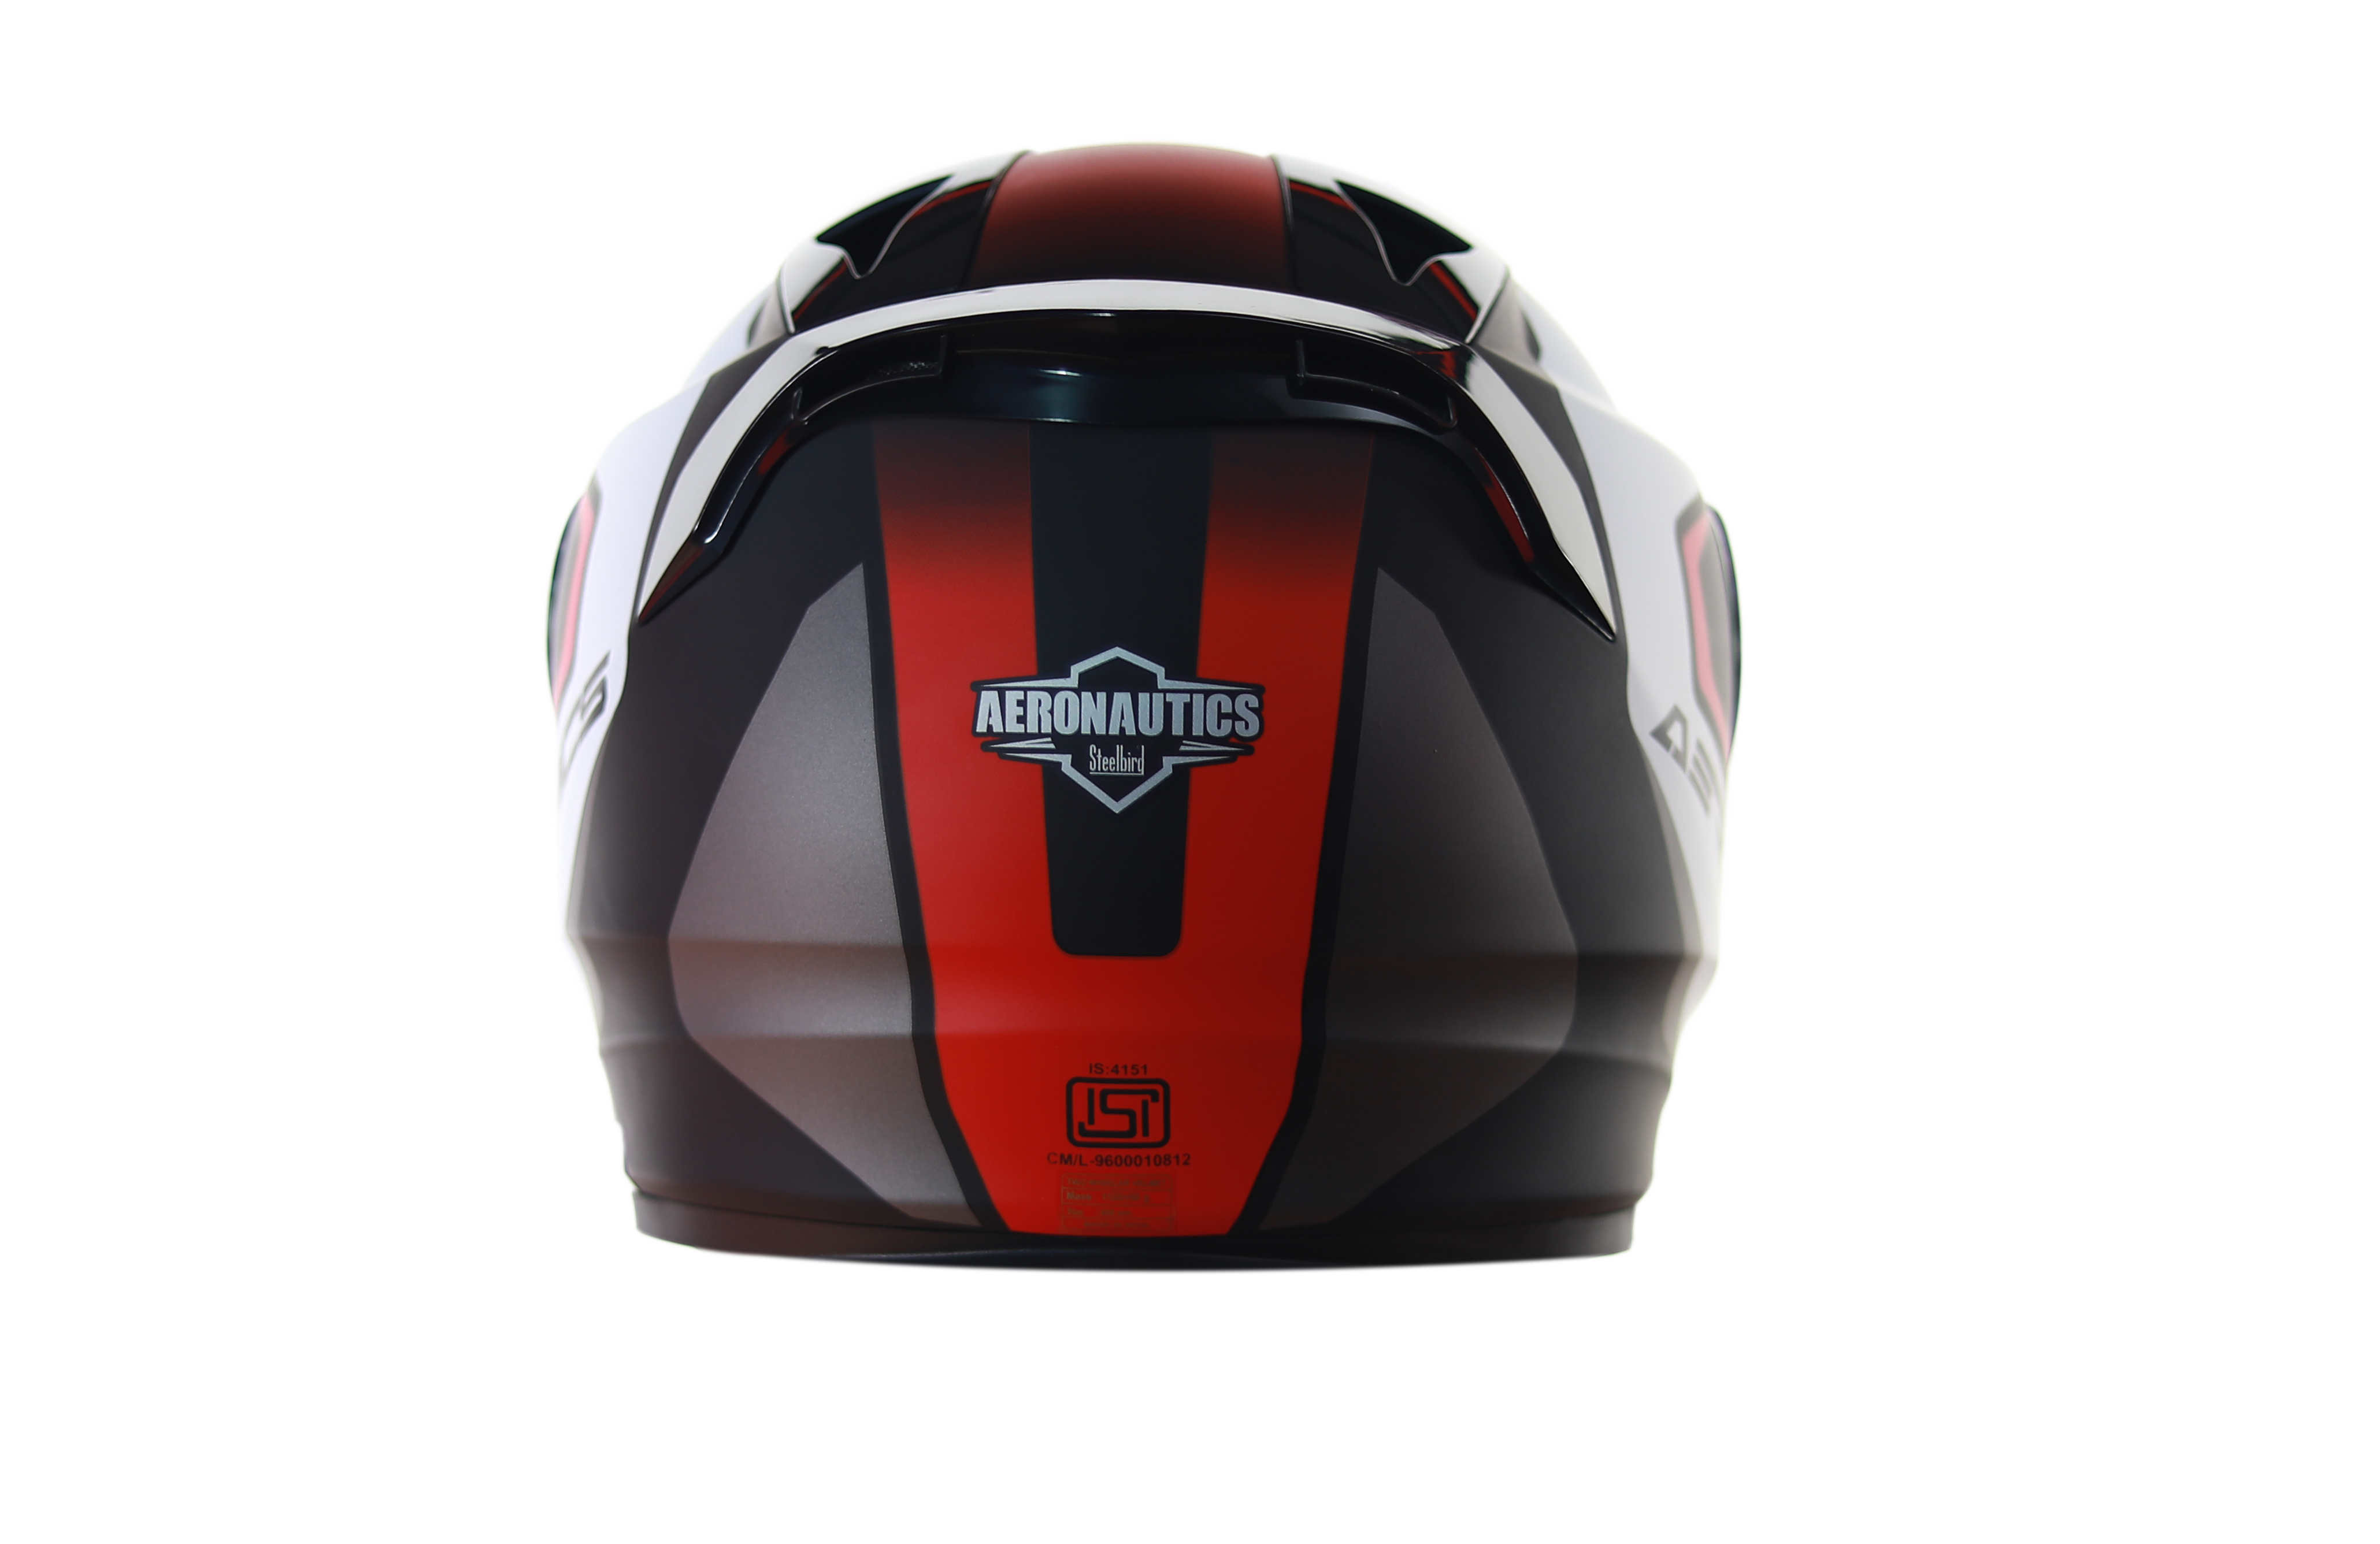 SA-1 Aerodynamics Mat Black With Red(Fitted With Clear Visor Extra Silver Chrome Visor Free)